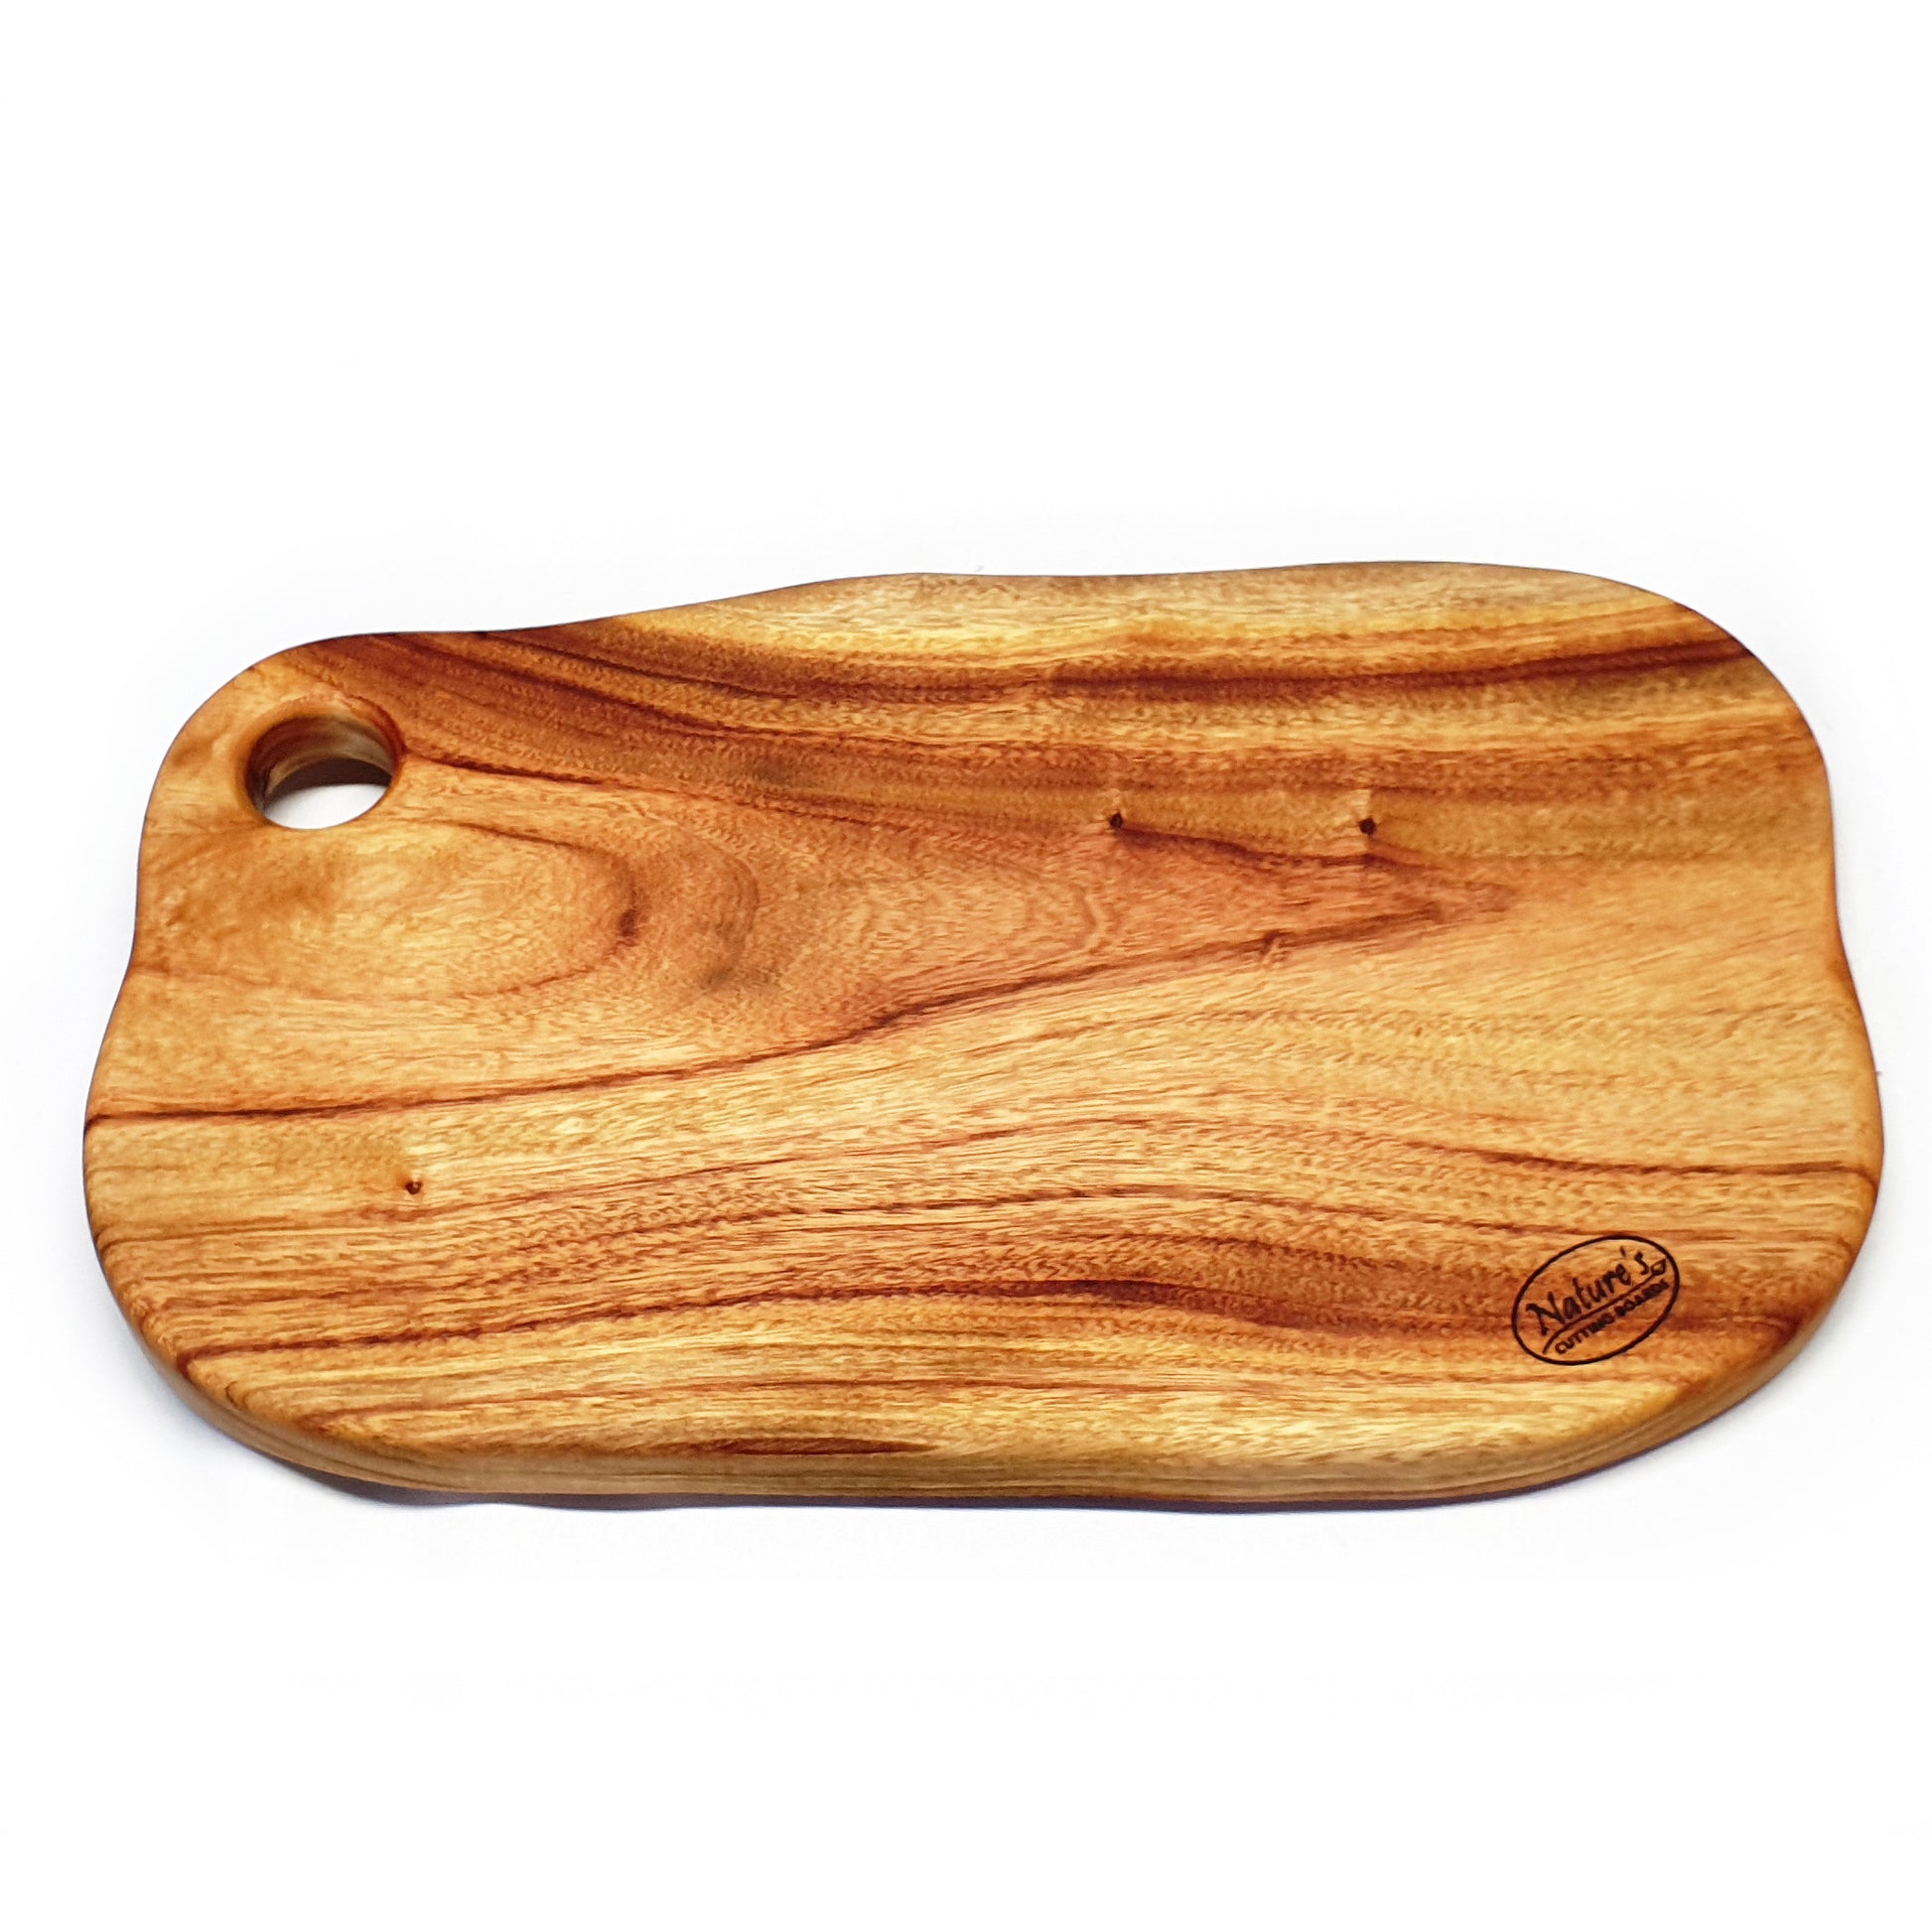 A large, freeform wooden cutting and chopping board from Nature's Boards showing the beautiful camphor laurel timber grains and a variety of colours and tones in the wood.